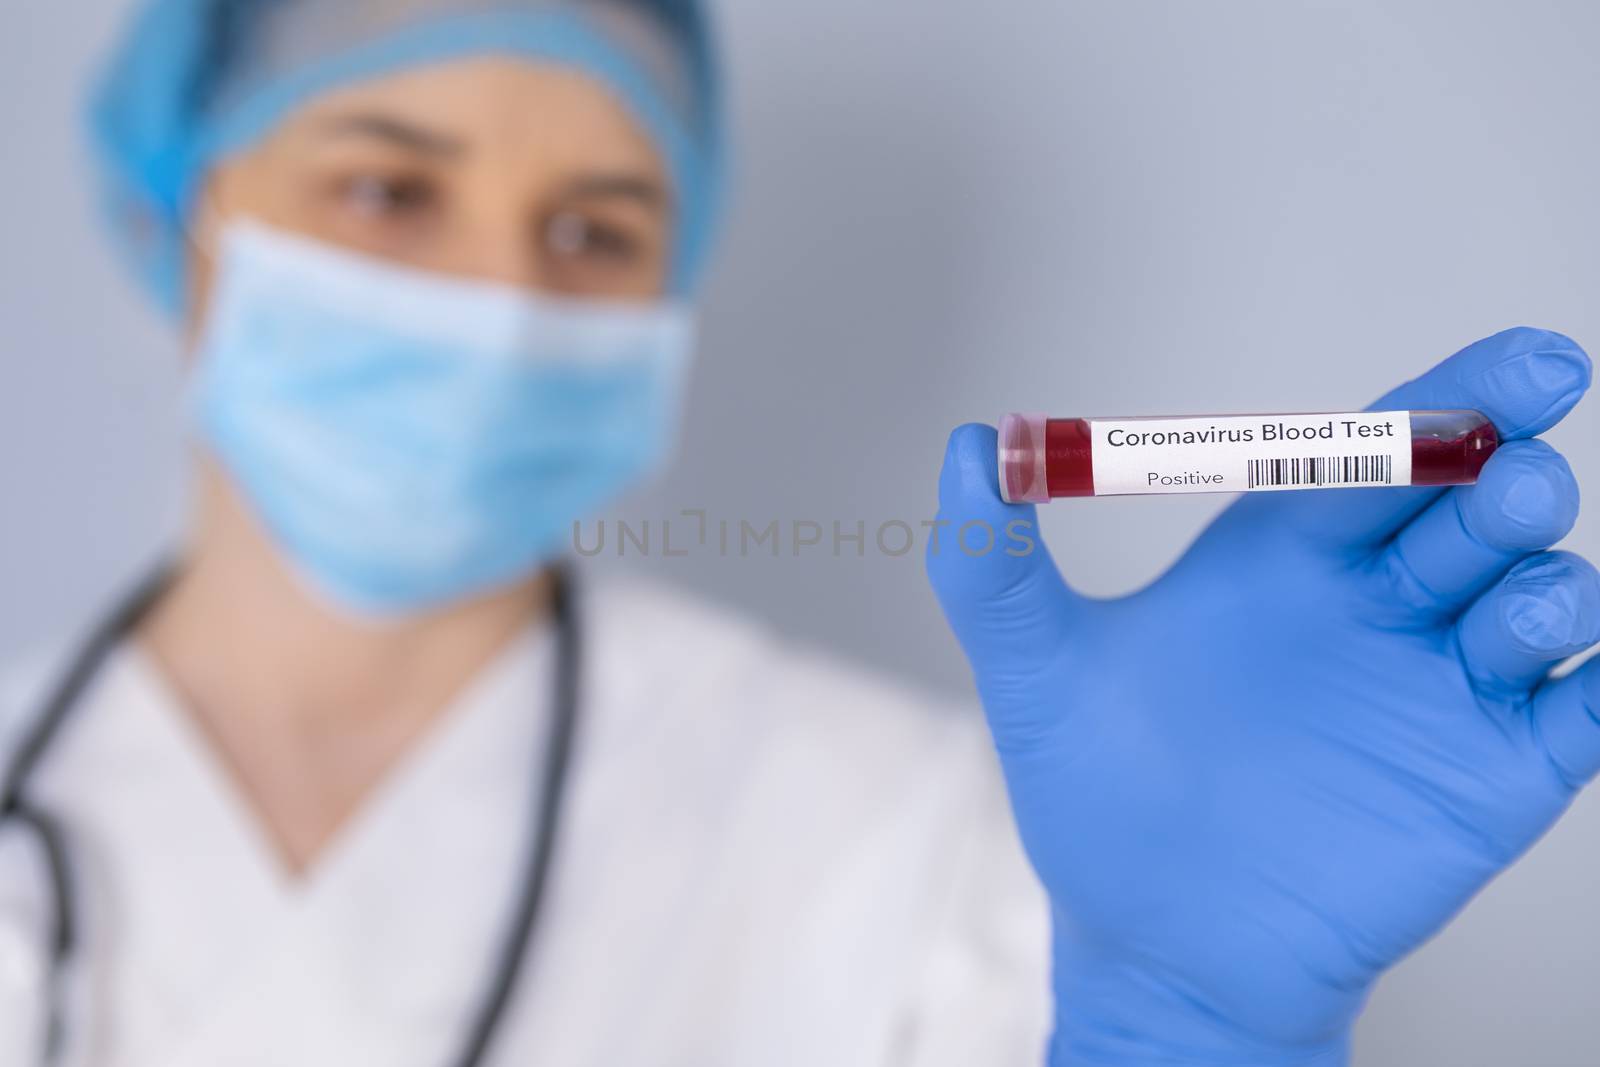 Nurse holding test tube with Positive Coronavirus test blood sample. Virus test and research concept. Focus is on blood test tube.